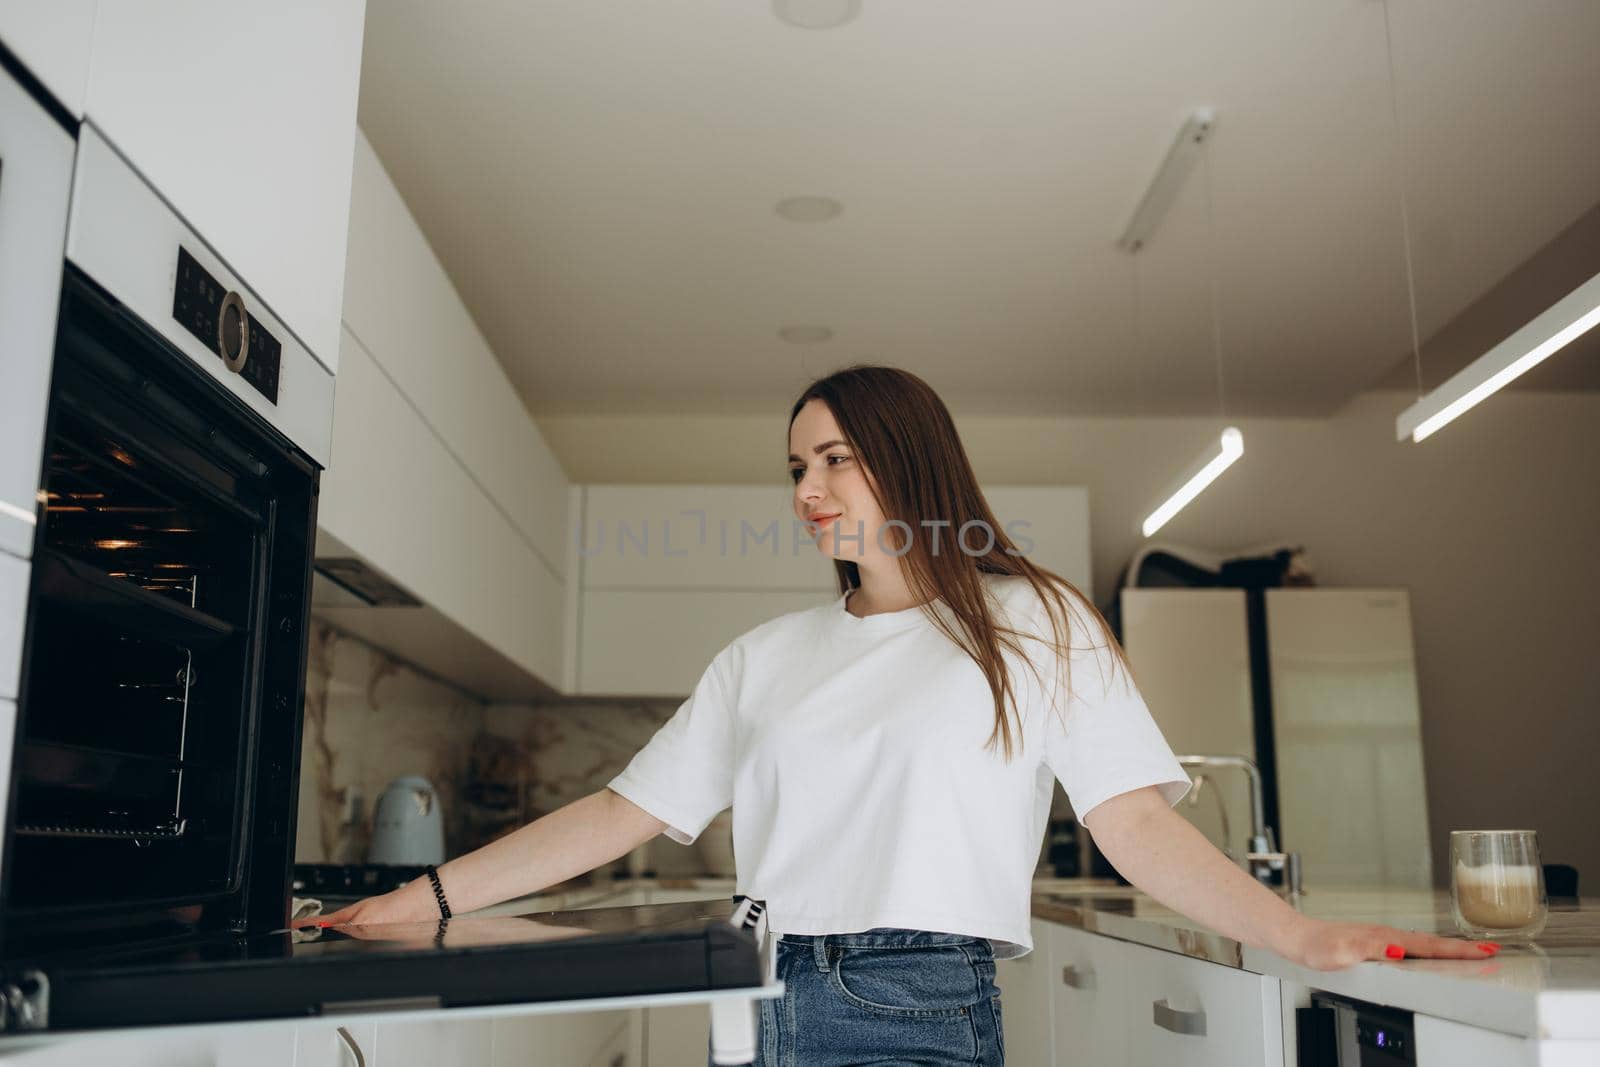 Portrait of happy girl putting baking tray in kitchen oven.